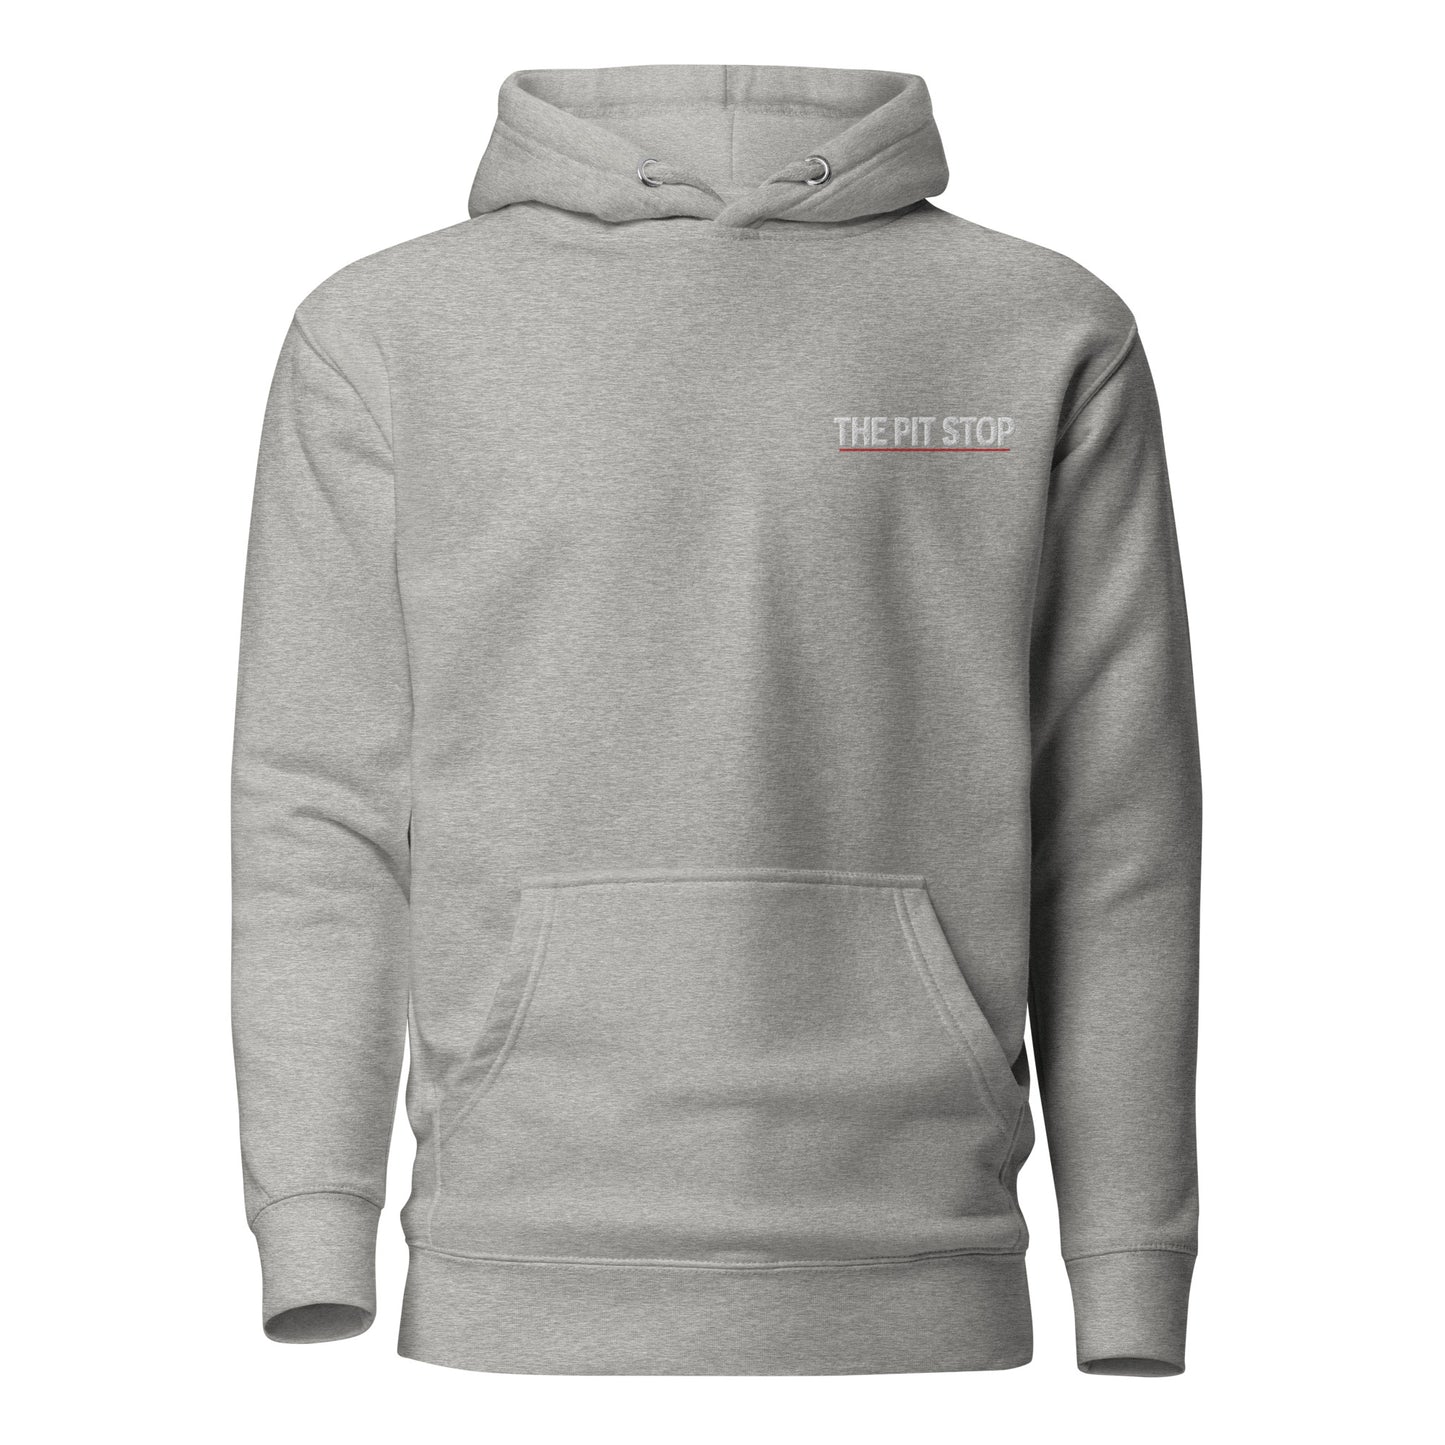 The Pit Stop Hoodie